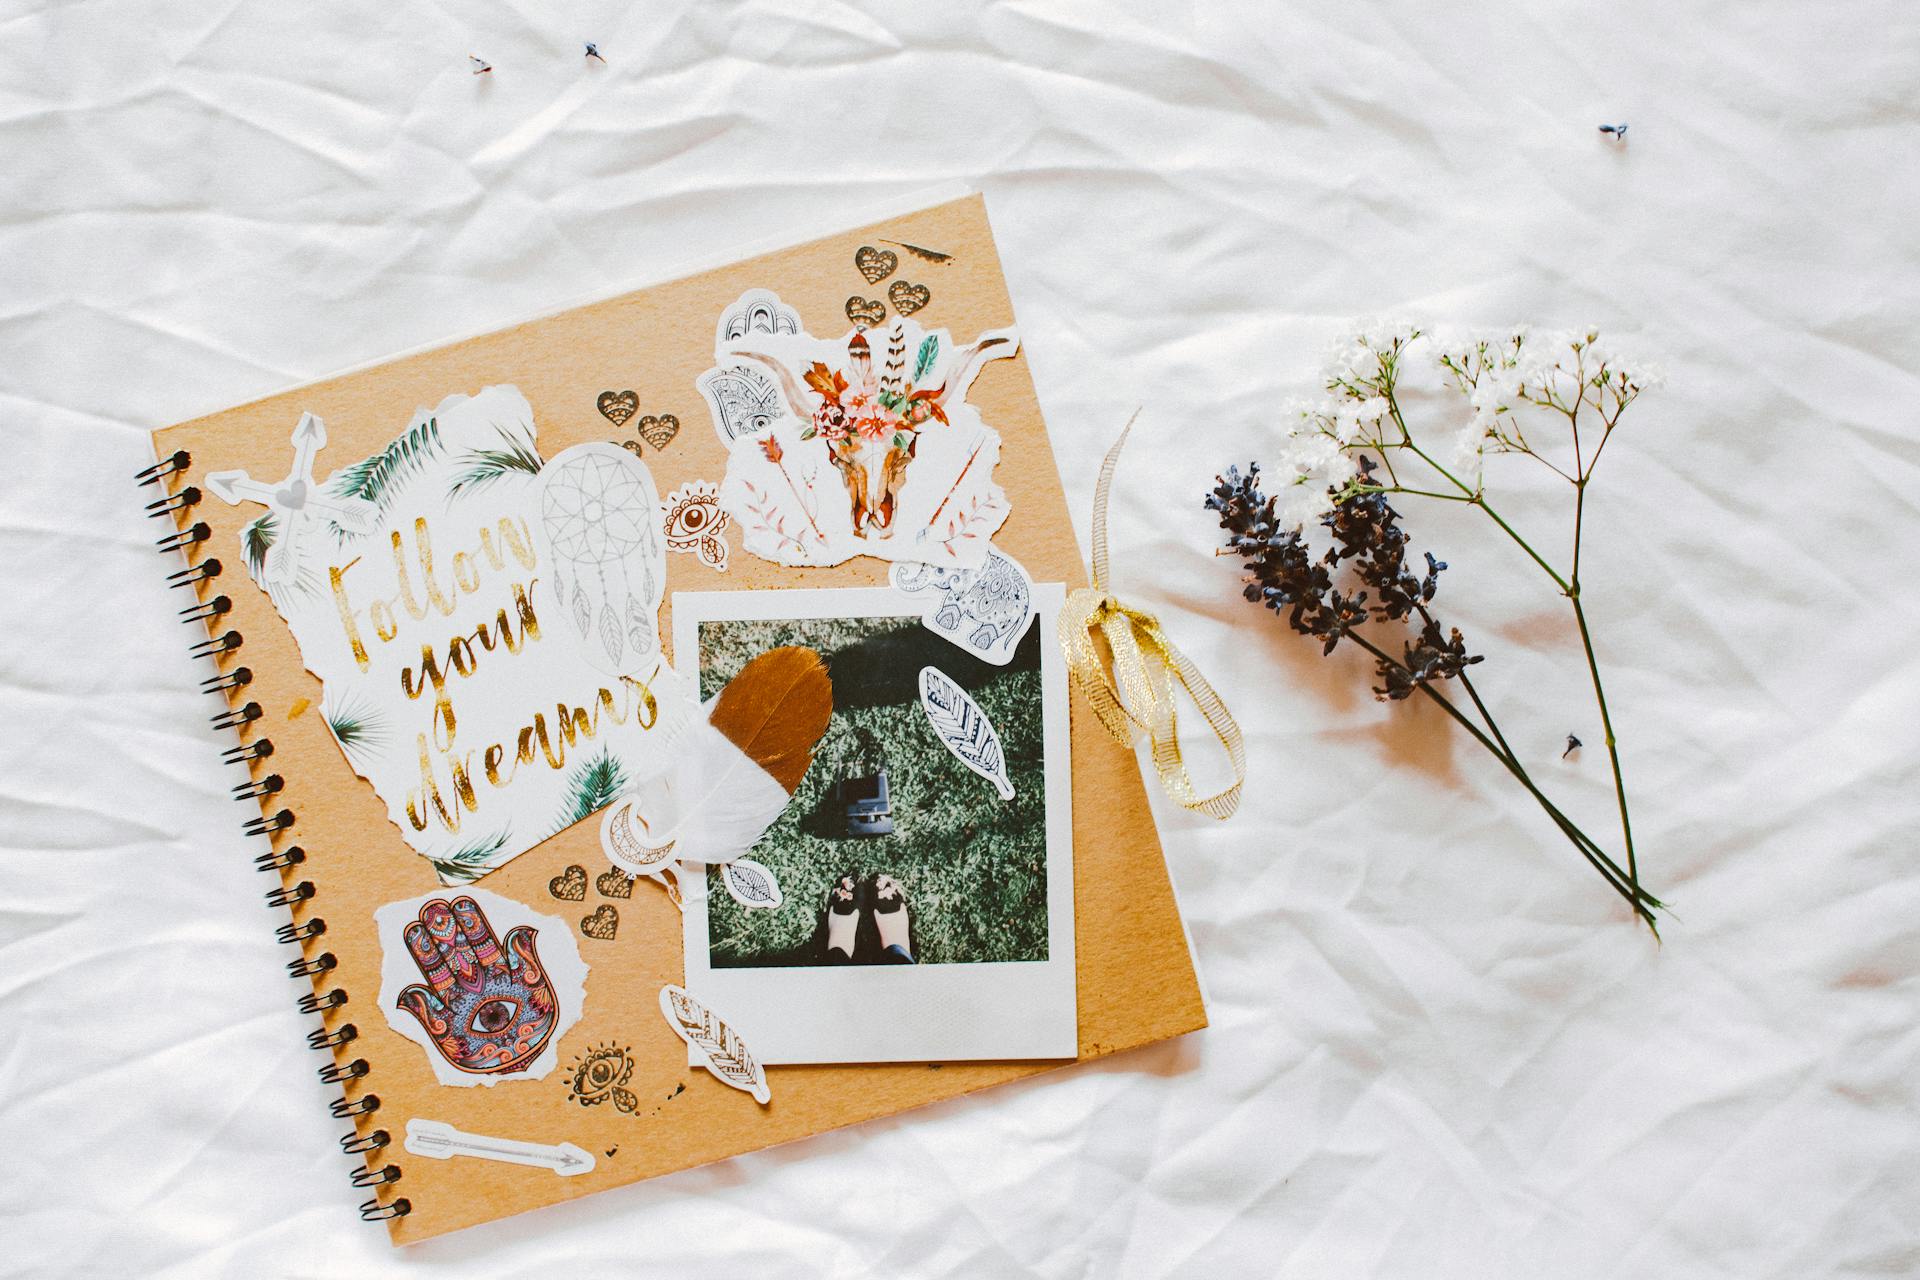 A scrapbook lying on a white cloth | Source: Pexels